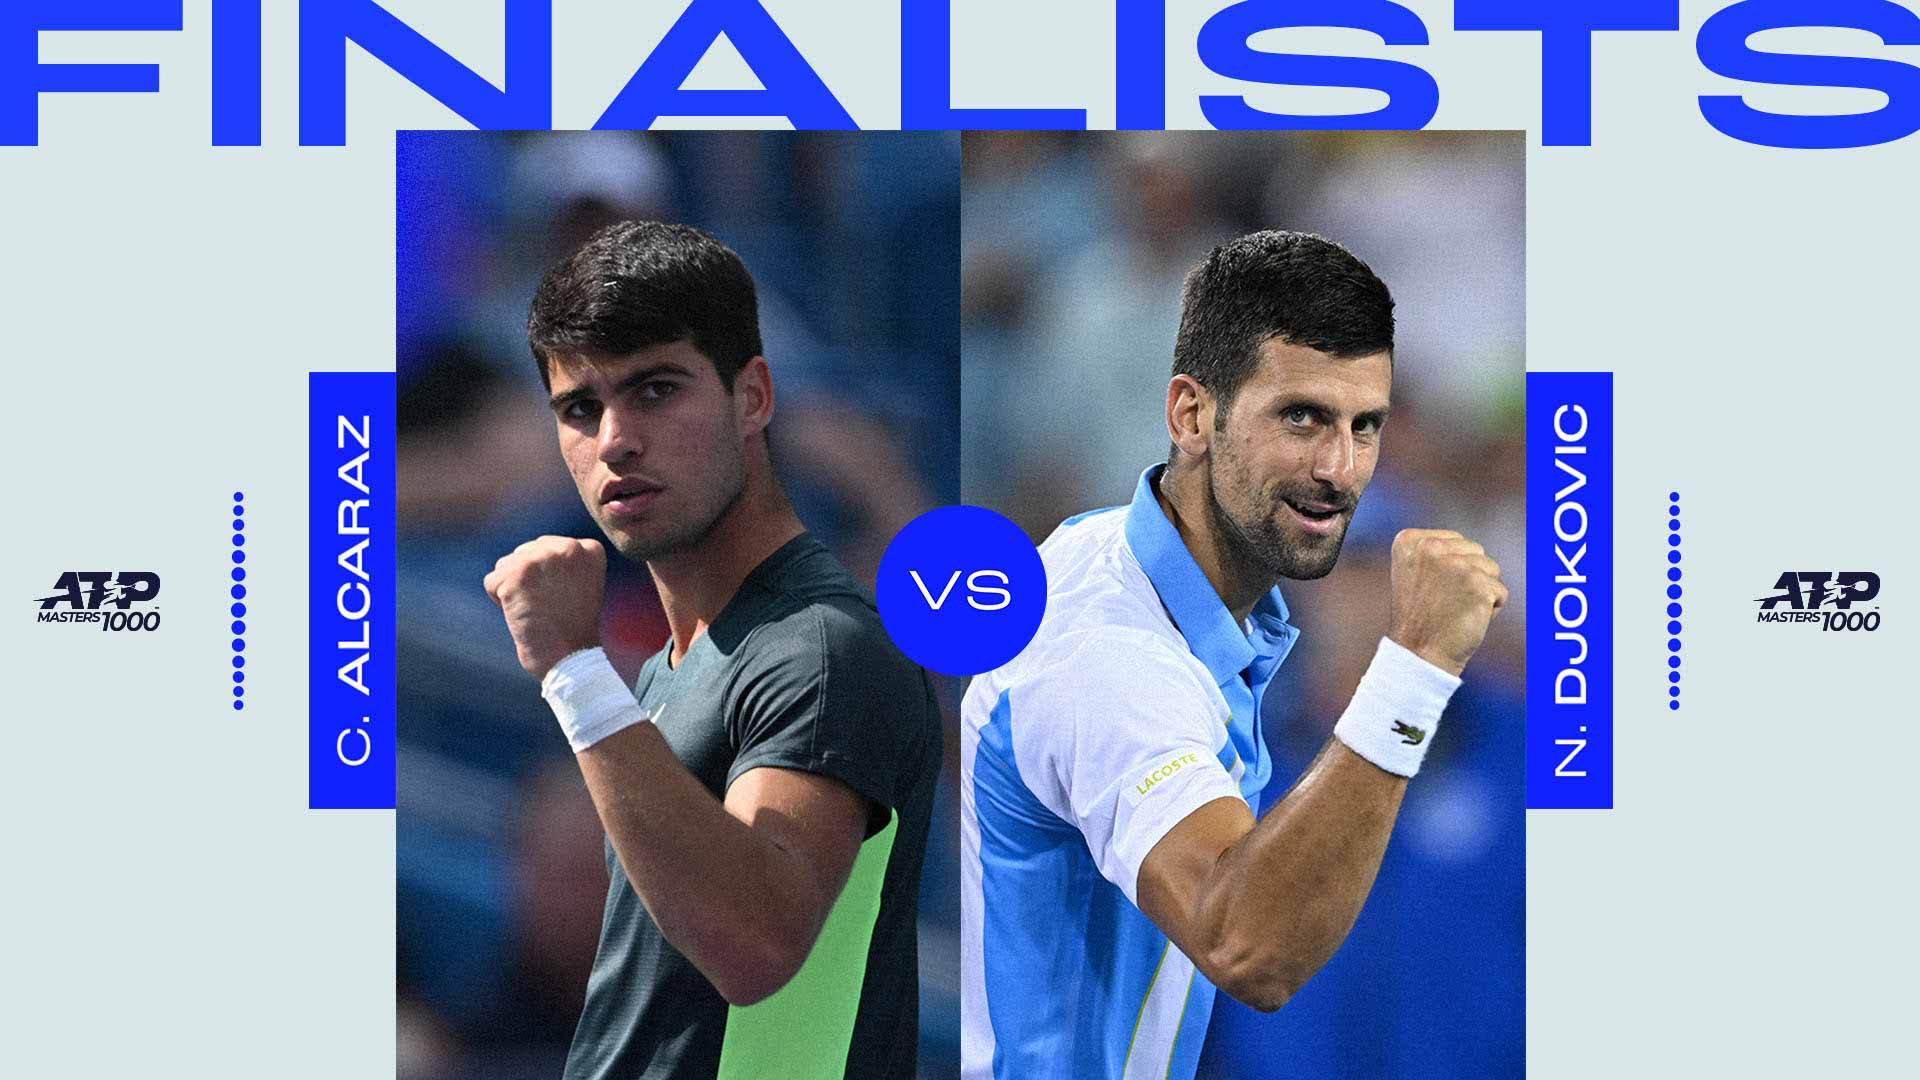 Carlos Alcaraz and Novak Djokovic will meet Sunday for the Western & Southern Open title.